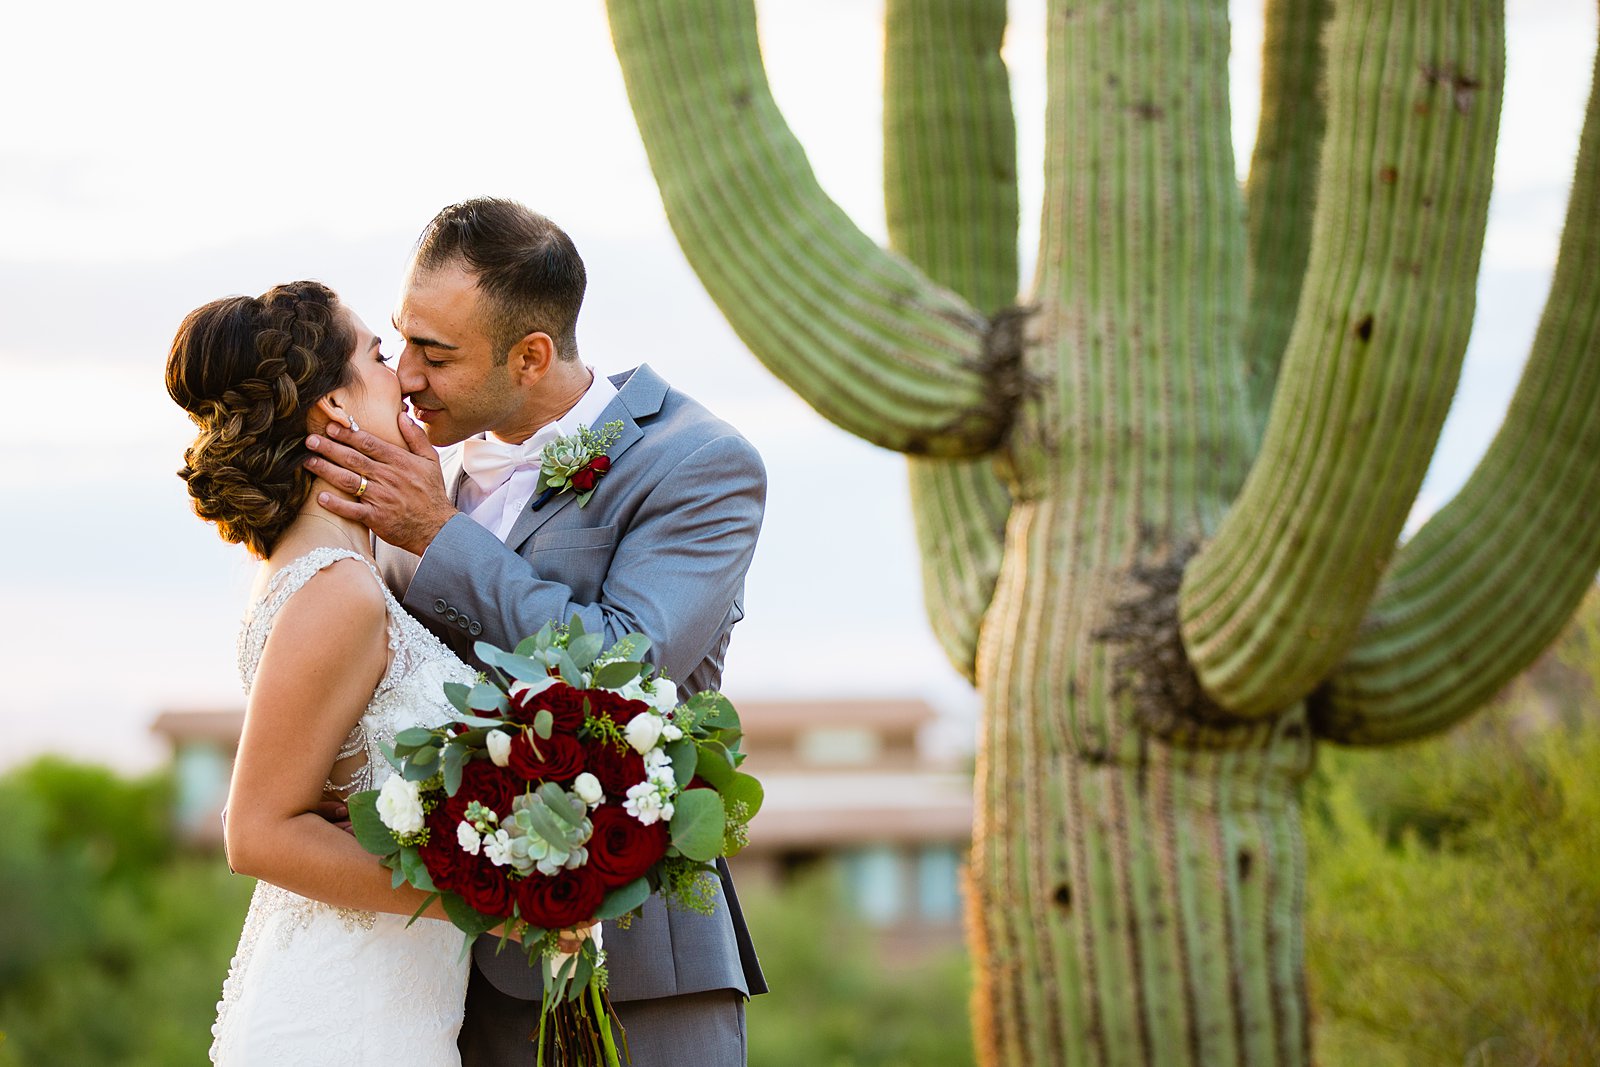 Bride and groom share an intimate moment during their Troon North wedding by Scottsdale wedding photographer PMA Photography.